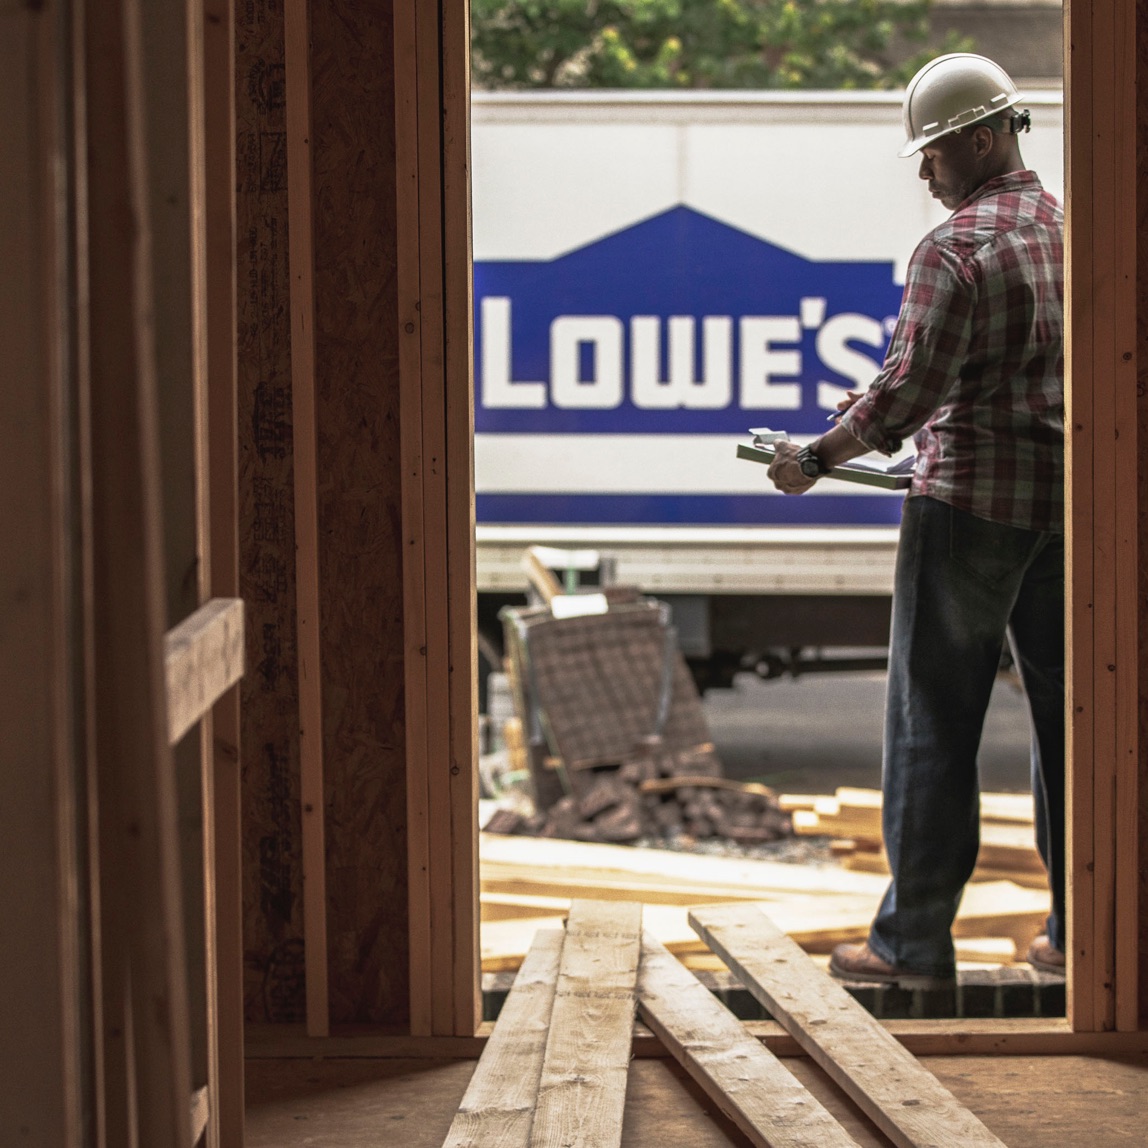 Image of construction worker looking at clipboard in mid-ground and a Lowe's Truck in the background